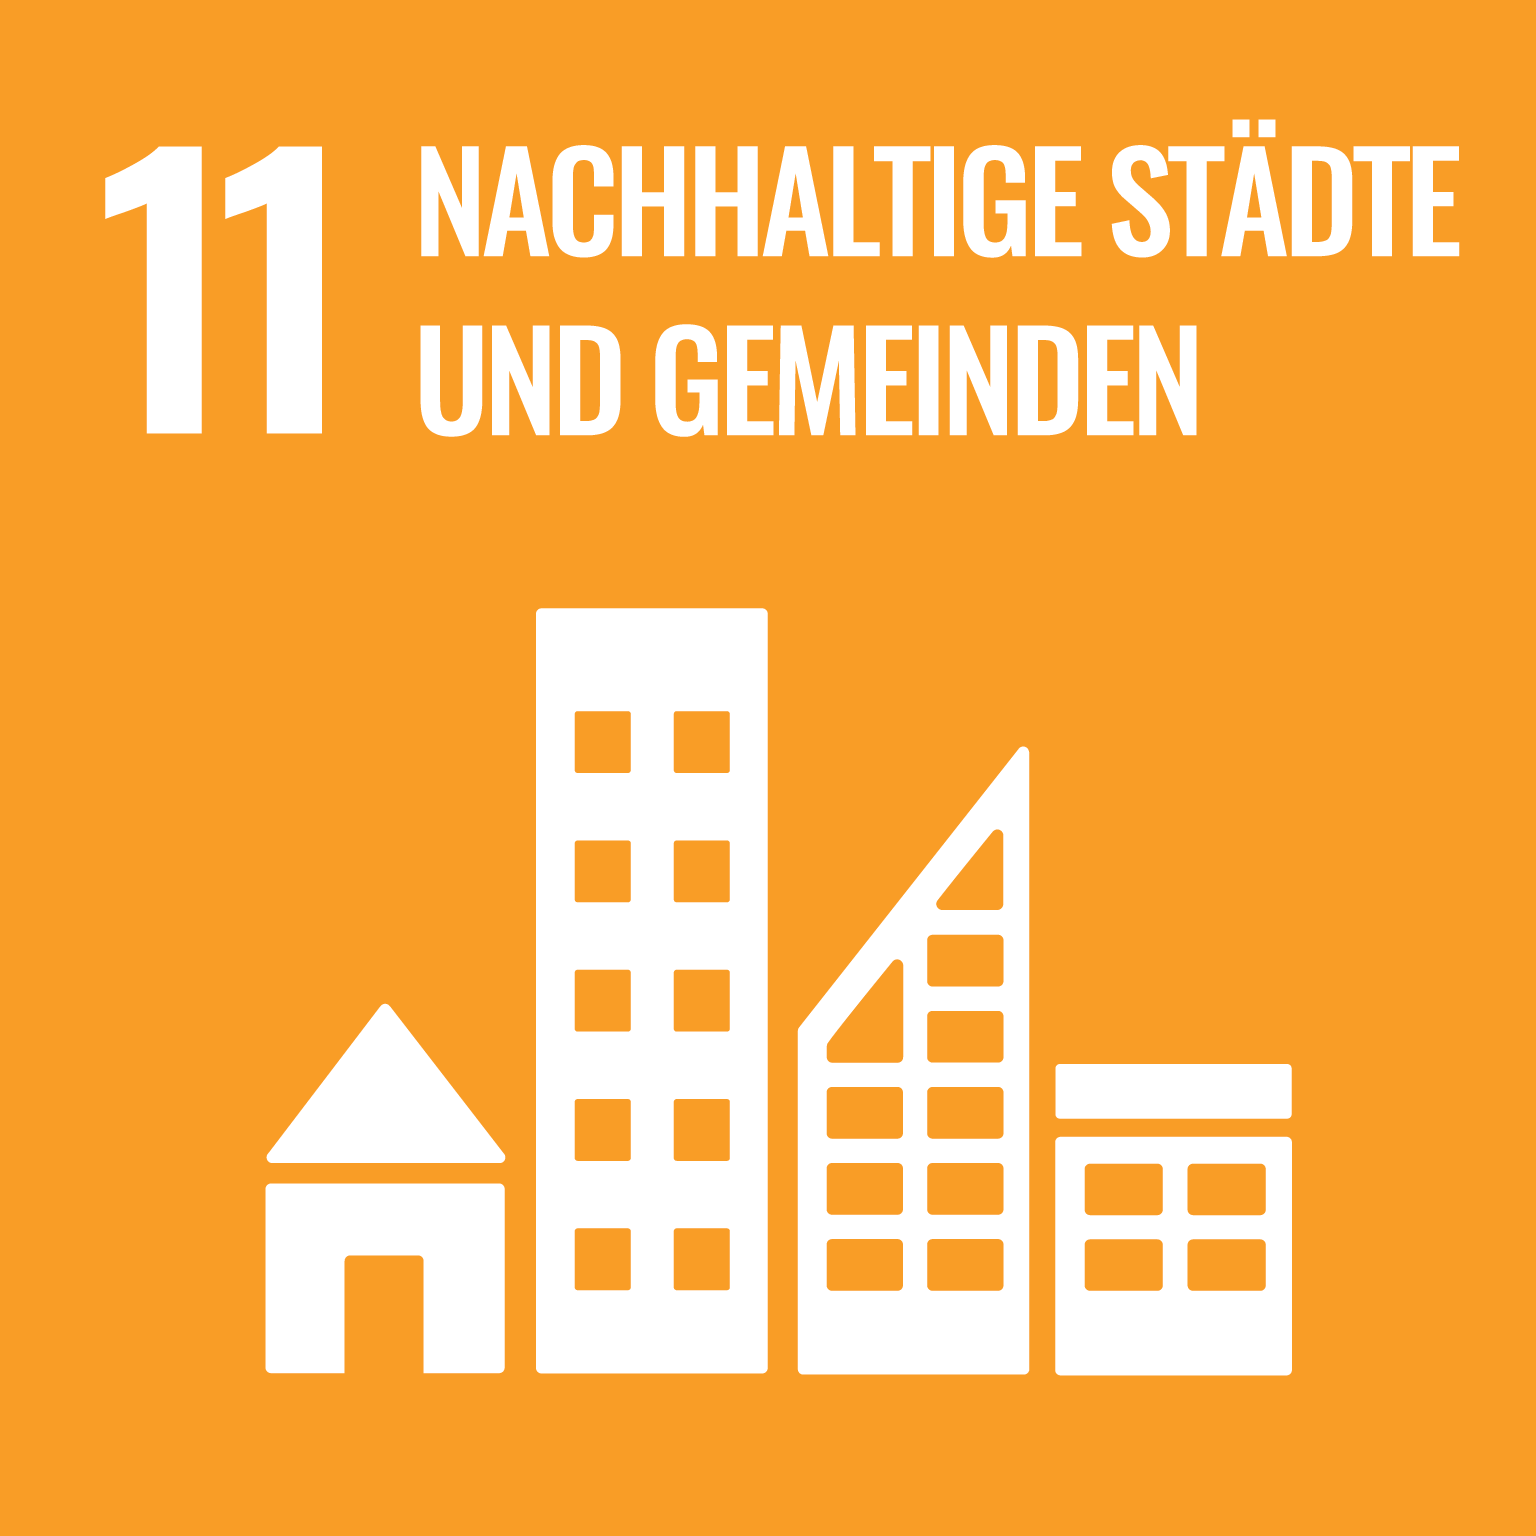 The graphic shows the logo of SDG 11, Sustainable Cities and Communities